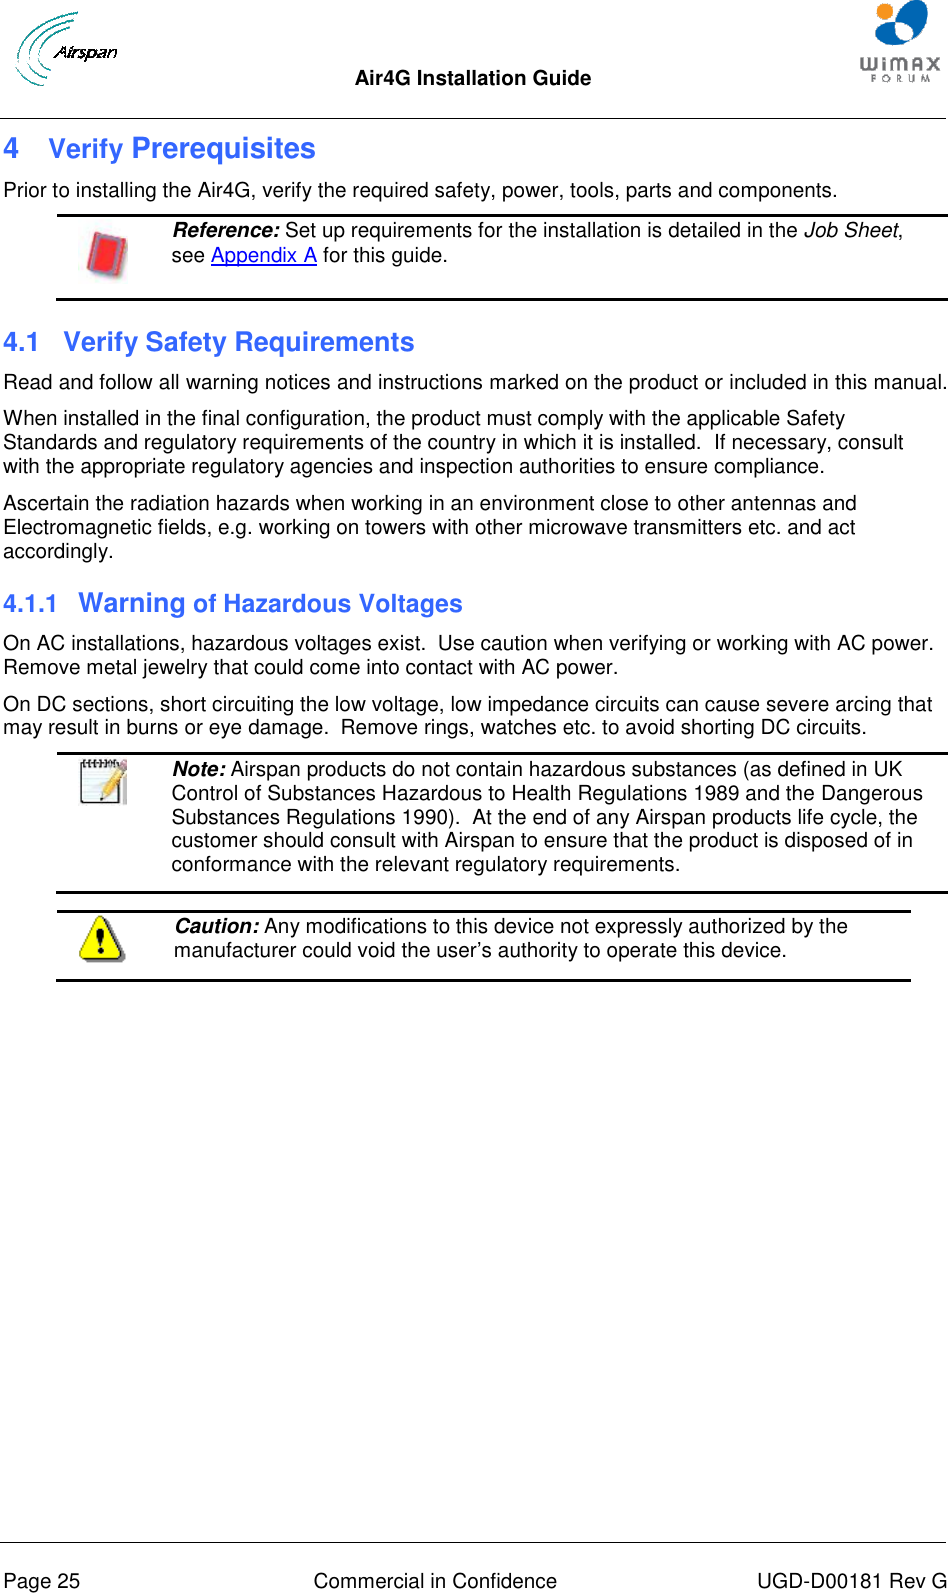  Air4G Installation Guide       Page 25  Commercial in Confidence  UGD-D00181 Rev G 4  Verify Prerequisites Prior to installing the Air4G, verify the required safety, power, tools, parts and components.  Reference: Set up requirements for the installation is detailed in the Job Sheet, see Appendix A for this guide. 4.1  Verify Safety Requirements Read and follow all warning notices and instructions marked on the product or included in this manual. When installed in the final configuration, the product must comply with the applicable Safety Standards and regulatory requirements of the country in which it is installed.  If necessary, consult with the appropriate regulatory agencies and inspection authorities to ensure compliance. Ascertain the radiation hazards when working in an environment close to other antennas and Electromagnetic fields, e.g. working on towers with other microwave transmitters etc. and act accordingly. 4.1.1  Warning of Hazardous Voltages On AC installations, hazardous voltages exist.  Use caution when verifying or working with AC power.  Remove metal jewelry that could come into contact with AC power. On DC sections, short circuiting the low voltage, low impedance circuits can cause severe arcing that may result in burns or eye damage.  Remove rings, watches etc. to avoid shorting DC circuits.   Note: Airspan products do not contain hazardous substances (as defined in UK Control of Substances Hazardous to Health Regulations 1989 and the Dangerous Substances Regulations 1990).  At the end of any Airspan products life cycle, the customer should consult with Airspan to ensure that the product is disposed of in conformance with the relevant regulatory requirements.   Caution: Any modifications to this device not expressly authorized by the manufacturer could void the user‟s authority to operate this device.  